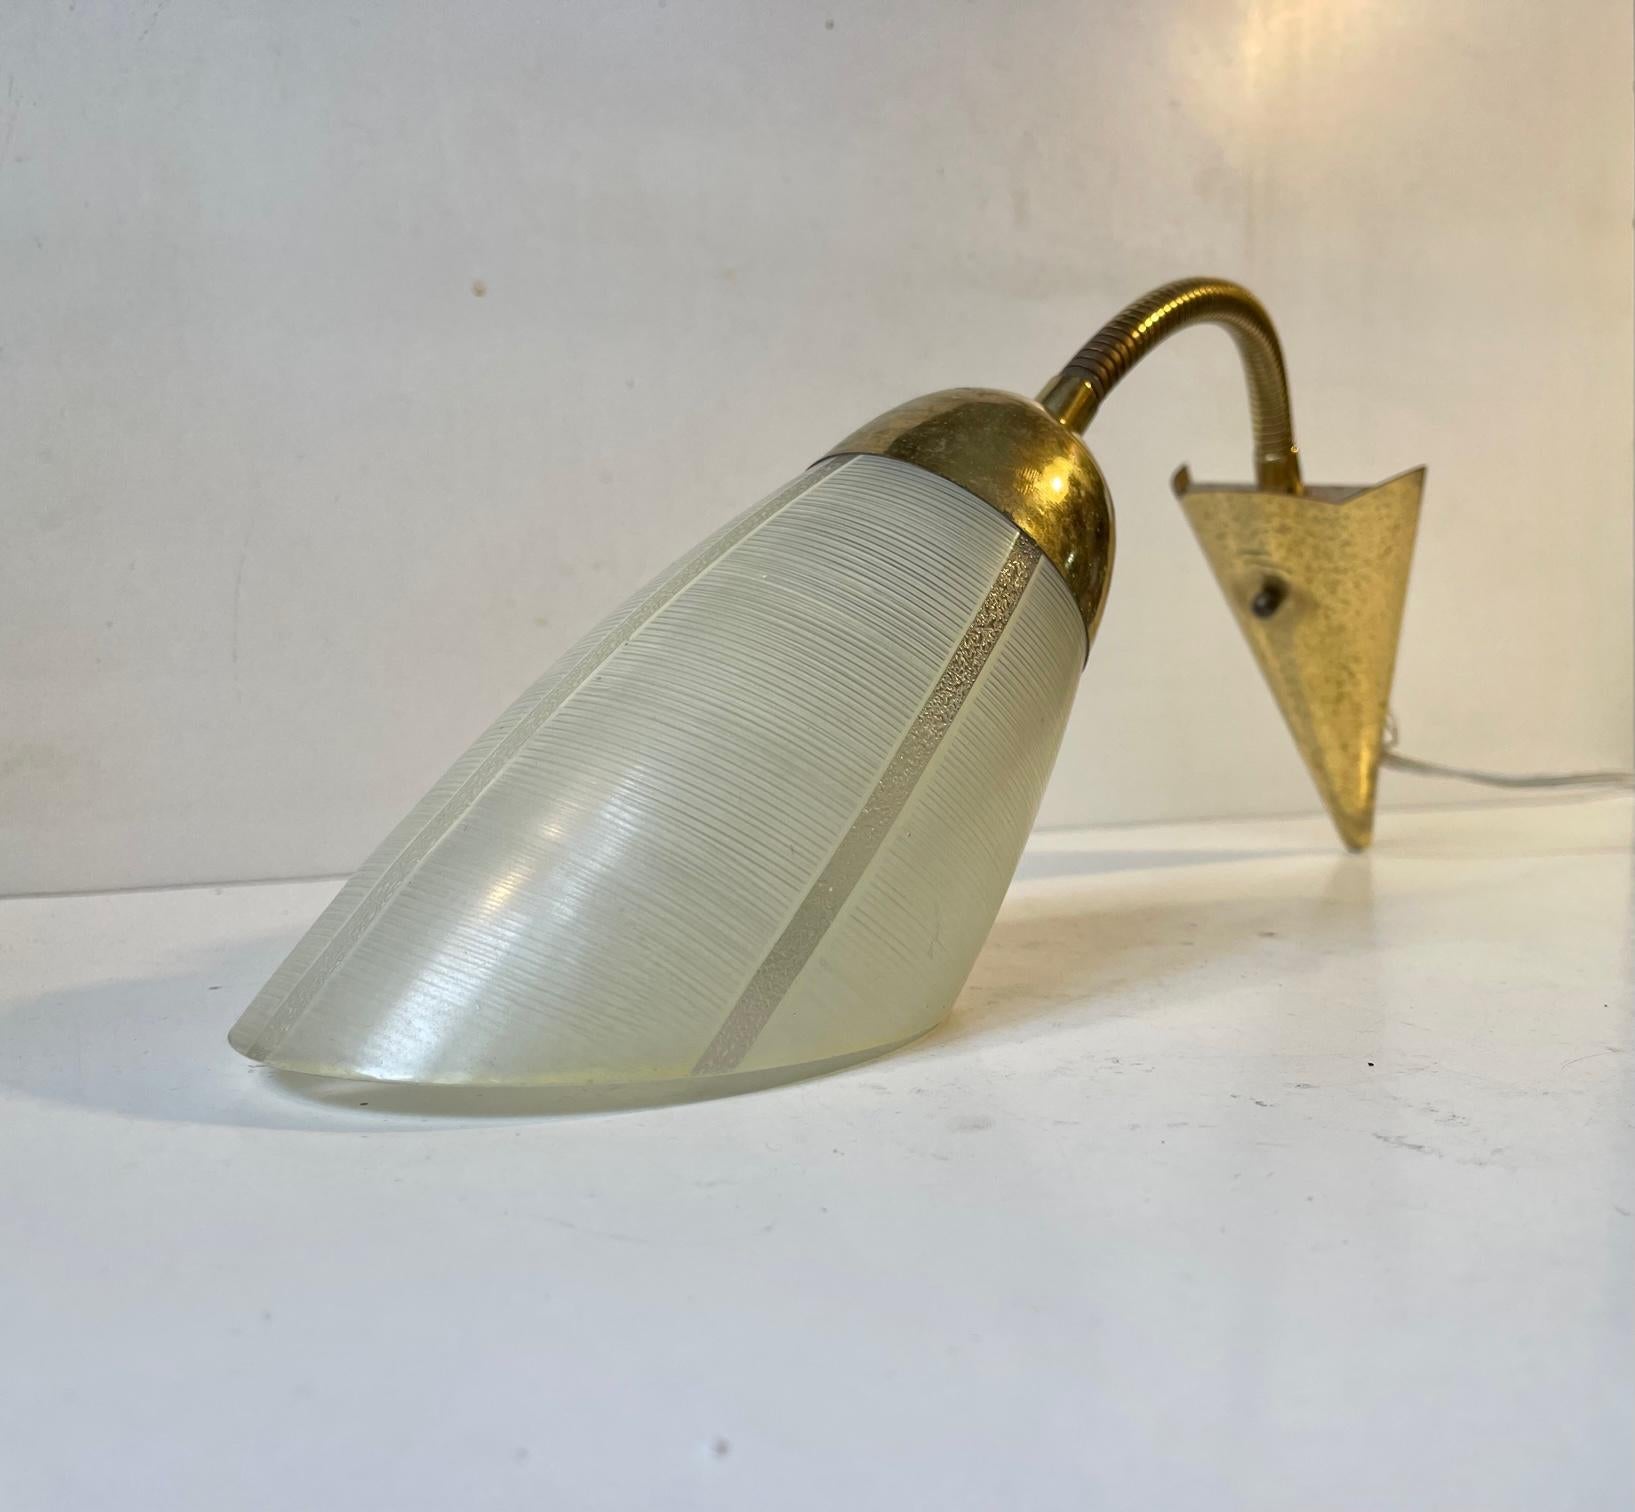 Early 1950s wall light made in Scandinavia in a style reminiscent of Stilnovo and the french modernist movement. Its composed of patinated brass and mounted with an angle-cut pastel white glass shade. with intricate horizontal stripes. Its